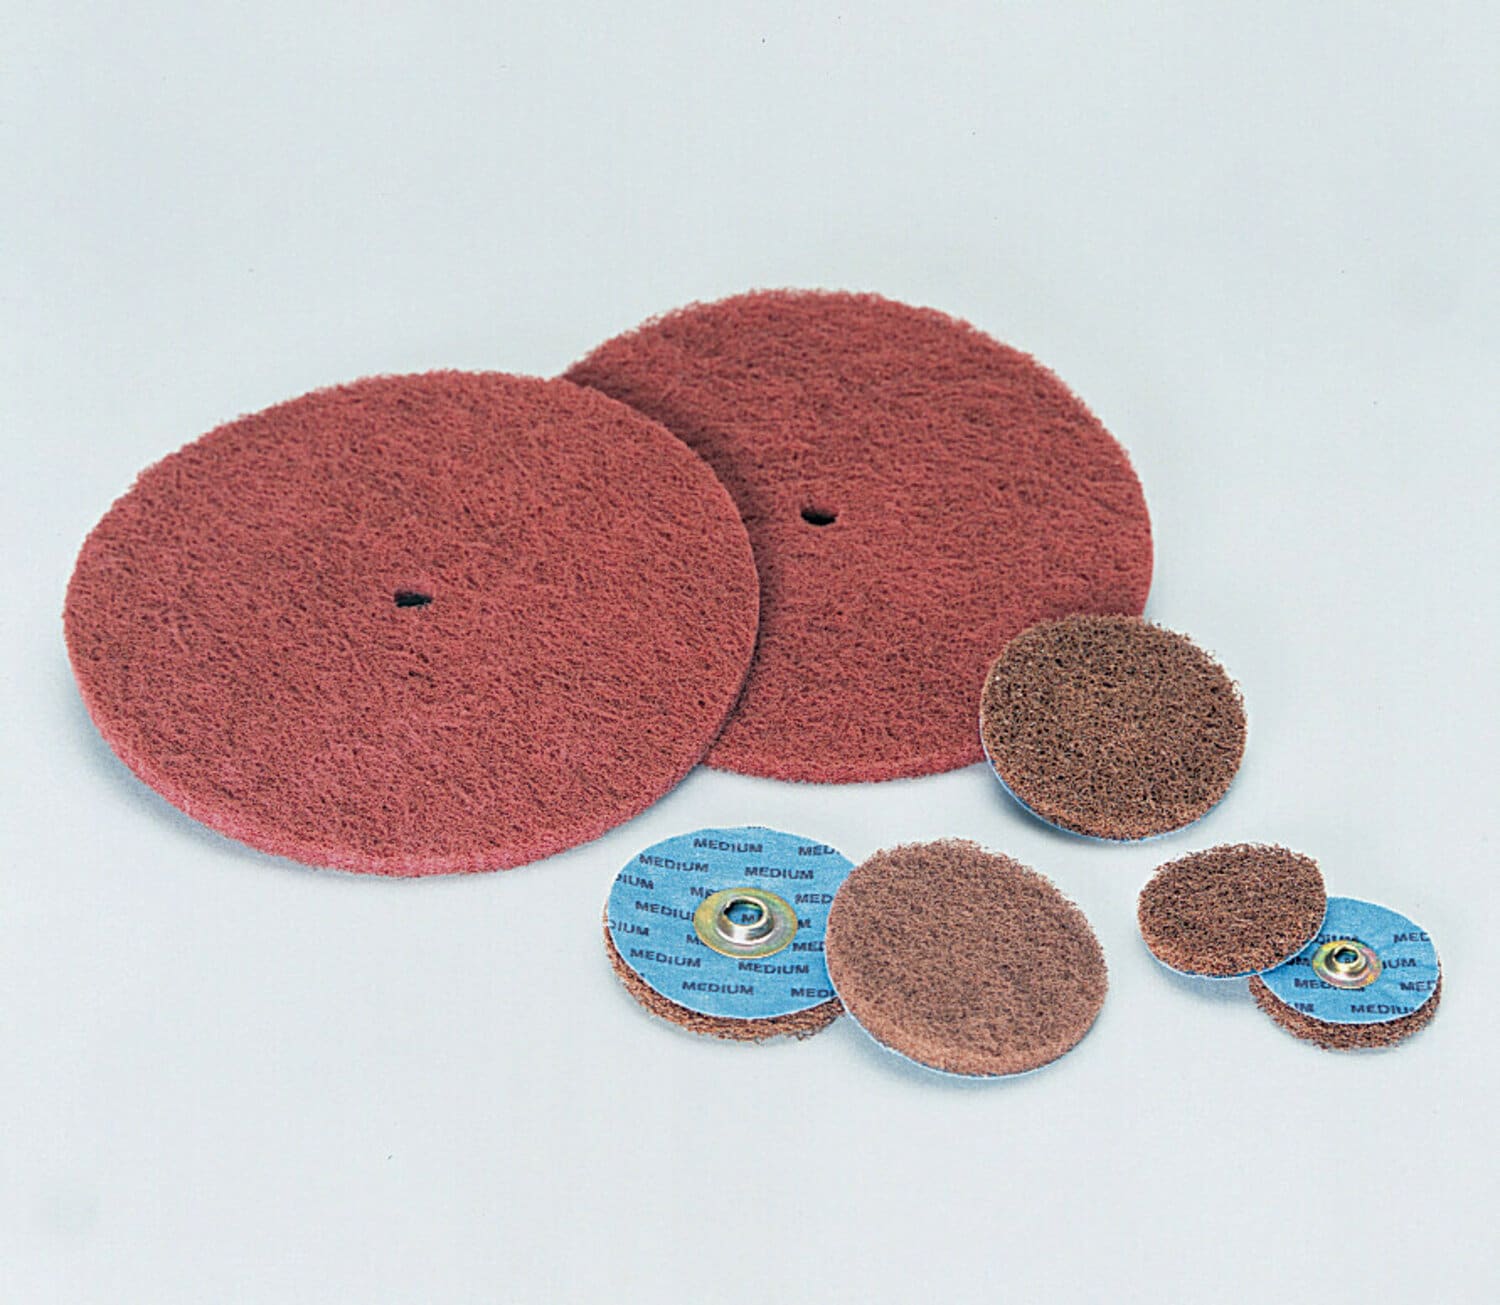 7010330834 - Standard Abrasives Buff and Blend GP Disc, 843410, 4 in x 1/4 in A MED,
10/Pac, 100 ea/Case